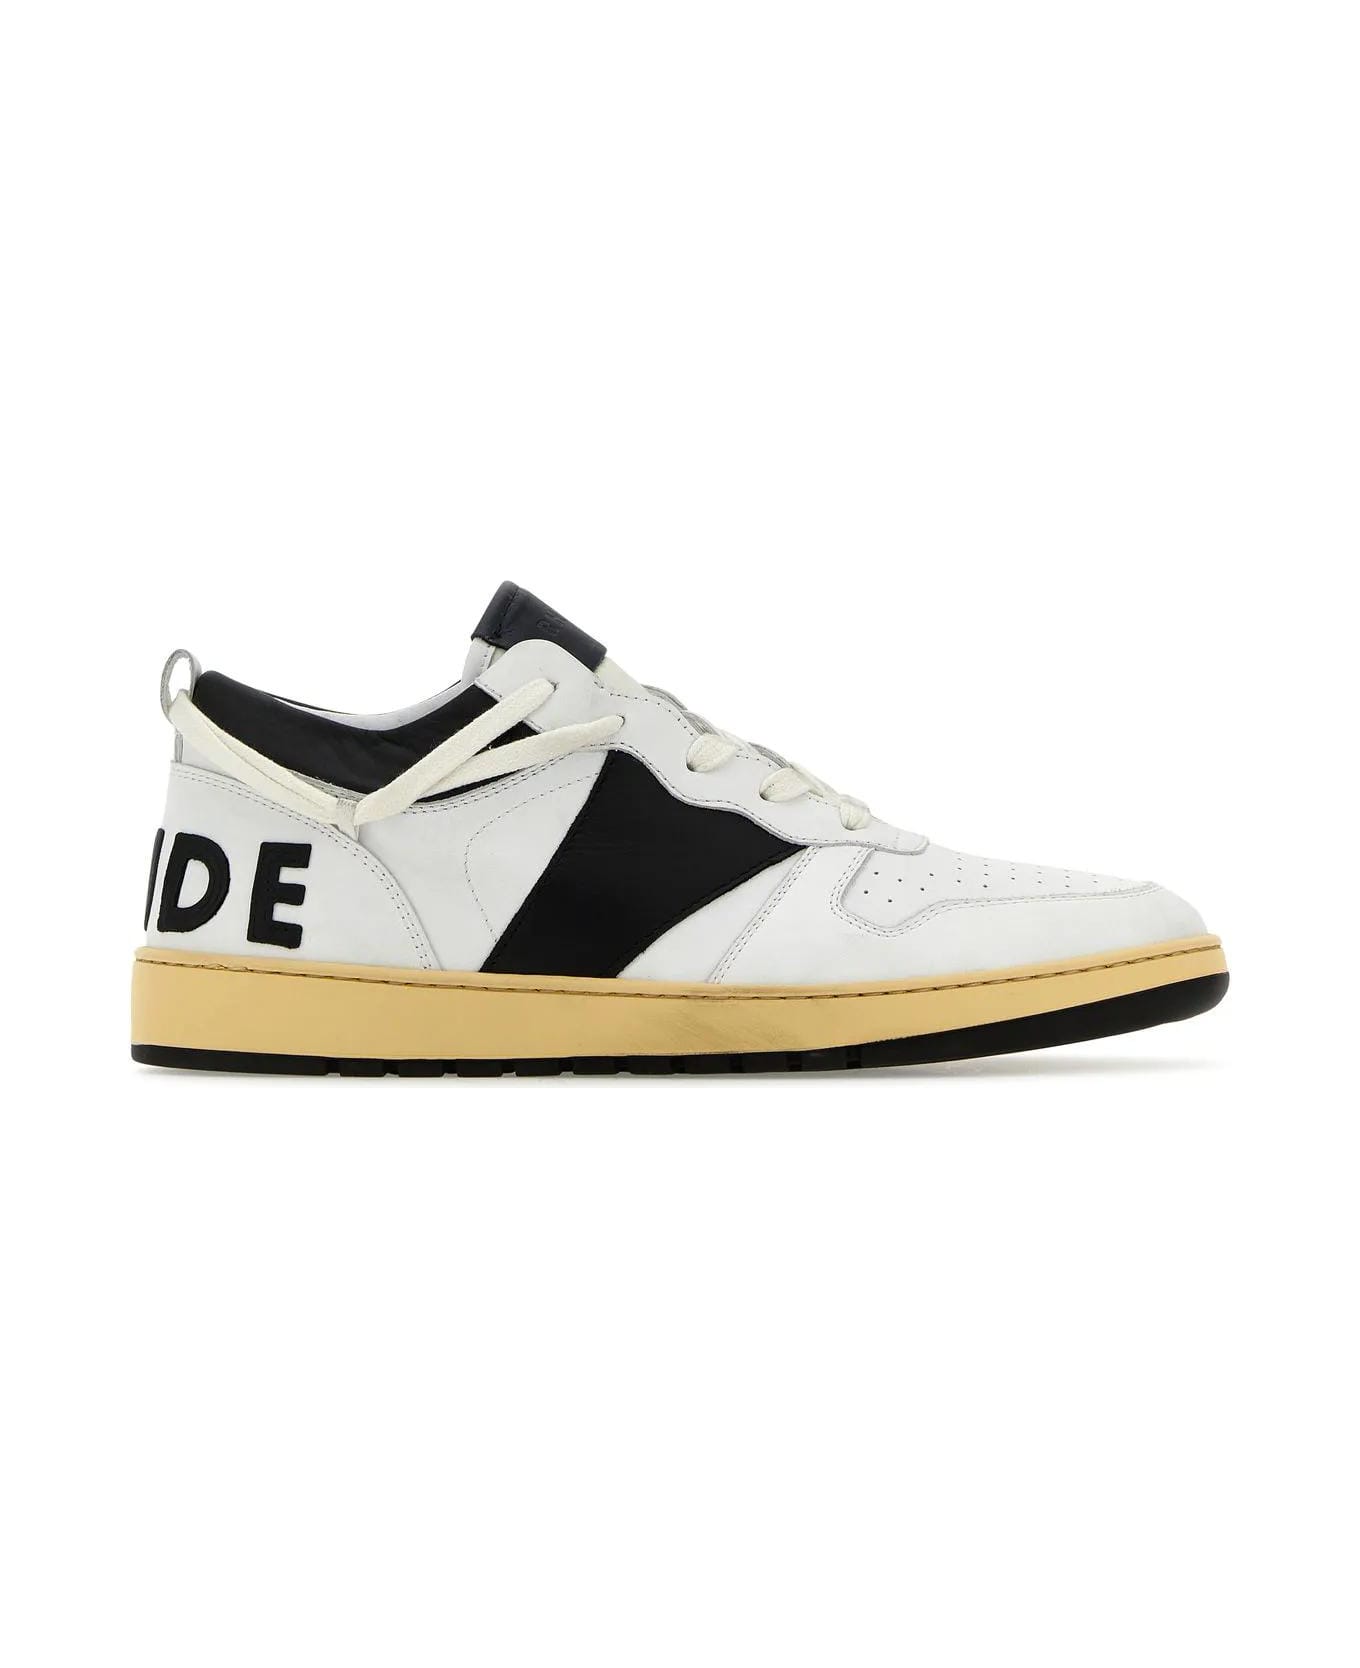 Rhude Two-tone Leather Rhecess Sneakers - WHITE